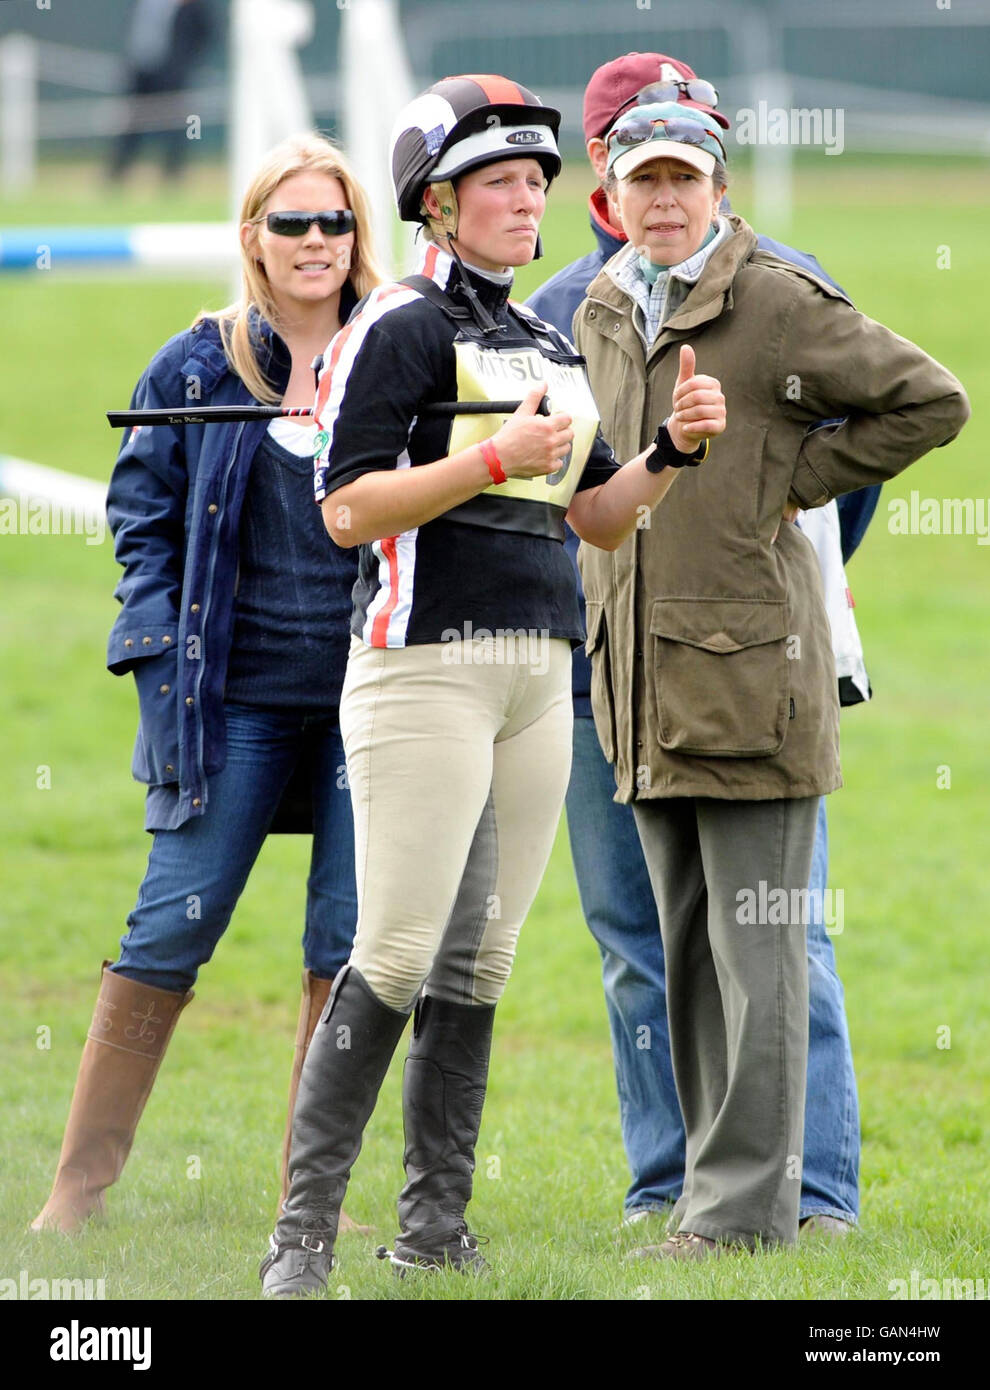 Zara Phillips stands with the Princess Royal, Autumn Kelly and Peter Phillips (hidden) after finishing the cross country course on Glenbuck with total penalty points of 57.2 at the Mitsubishi Motors Badminton Horse Trials. Stock Photo